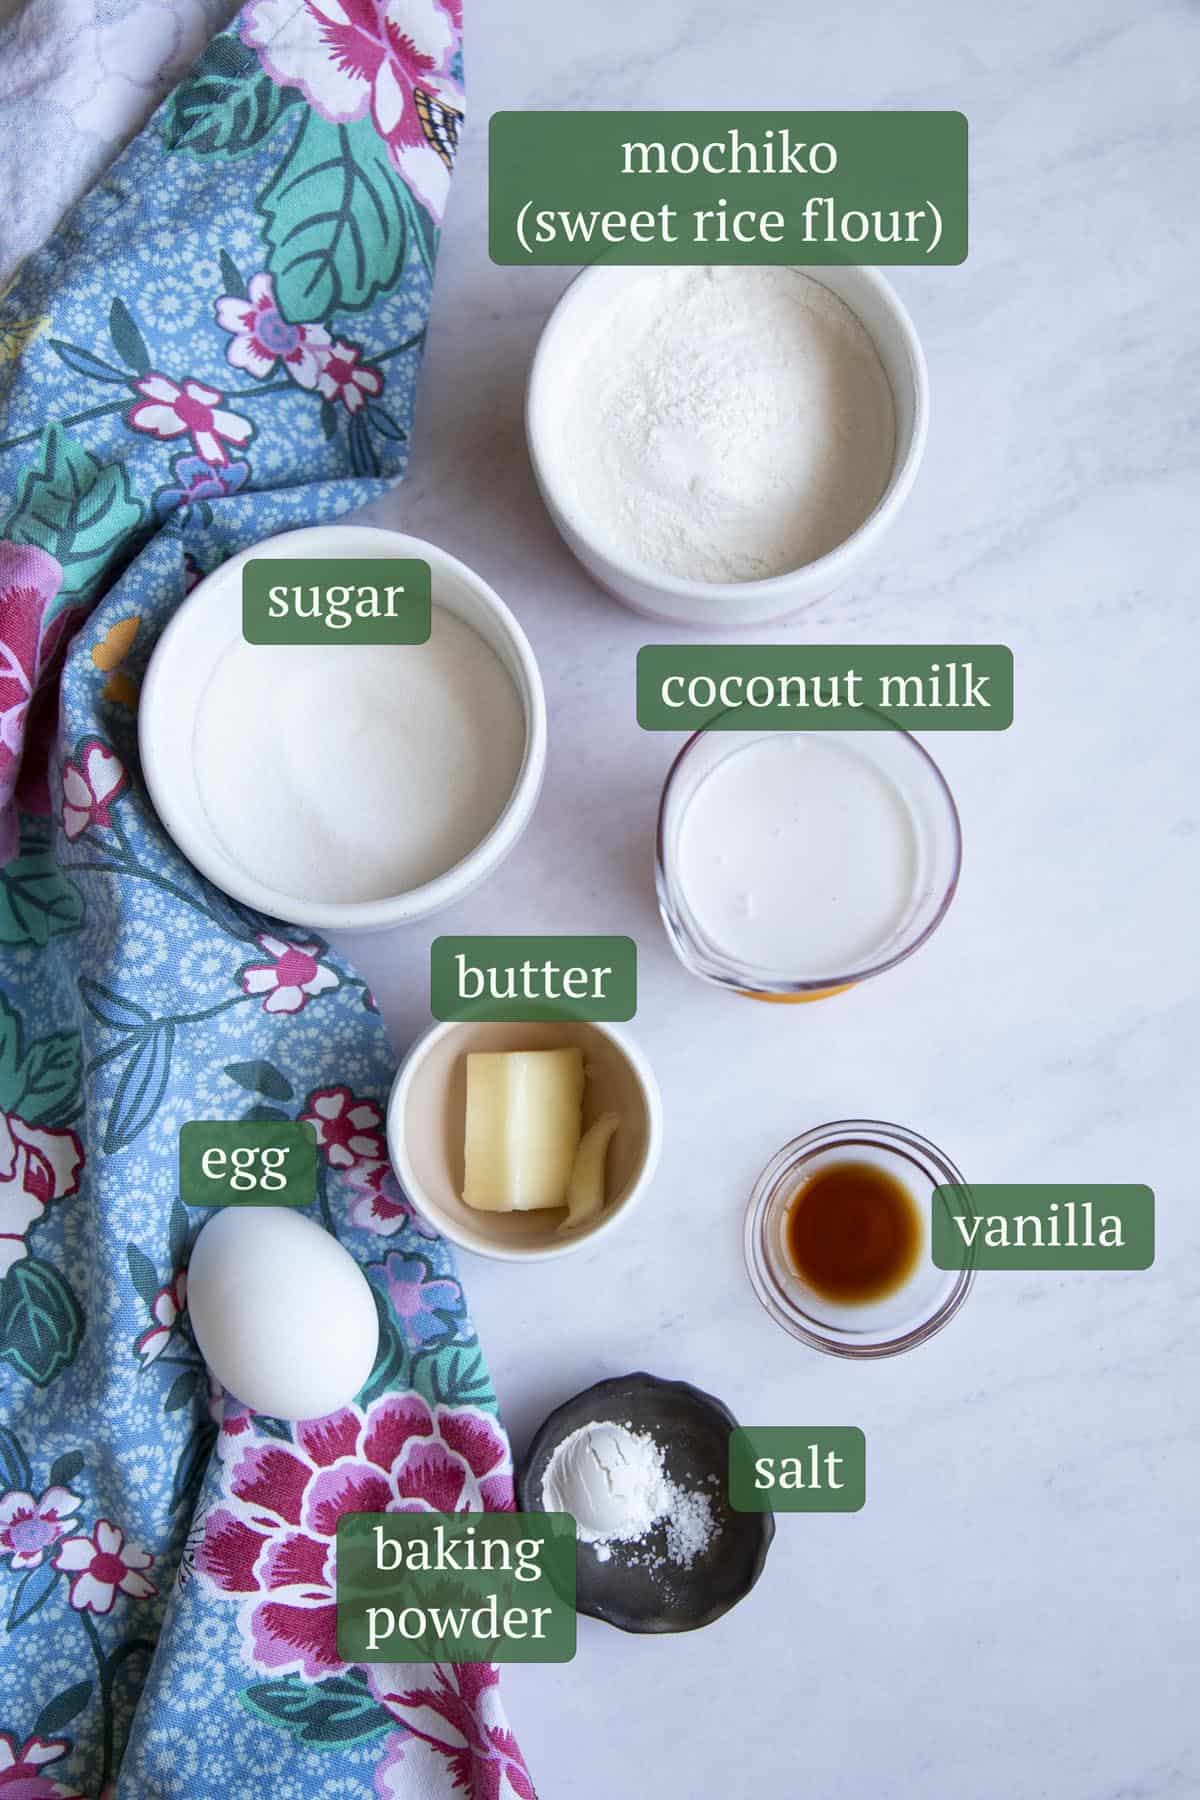 Ingredients for mochi cakes.